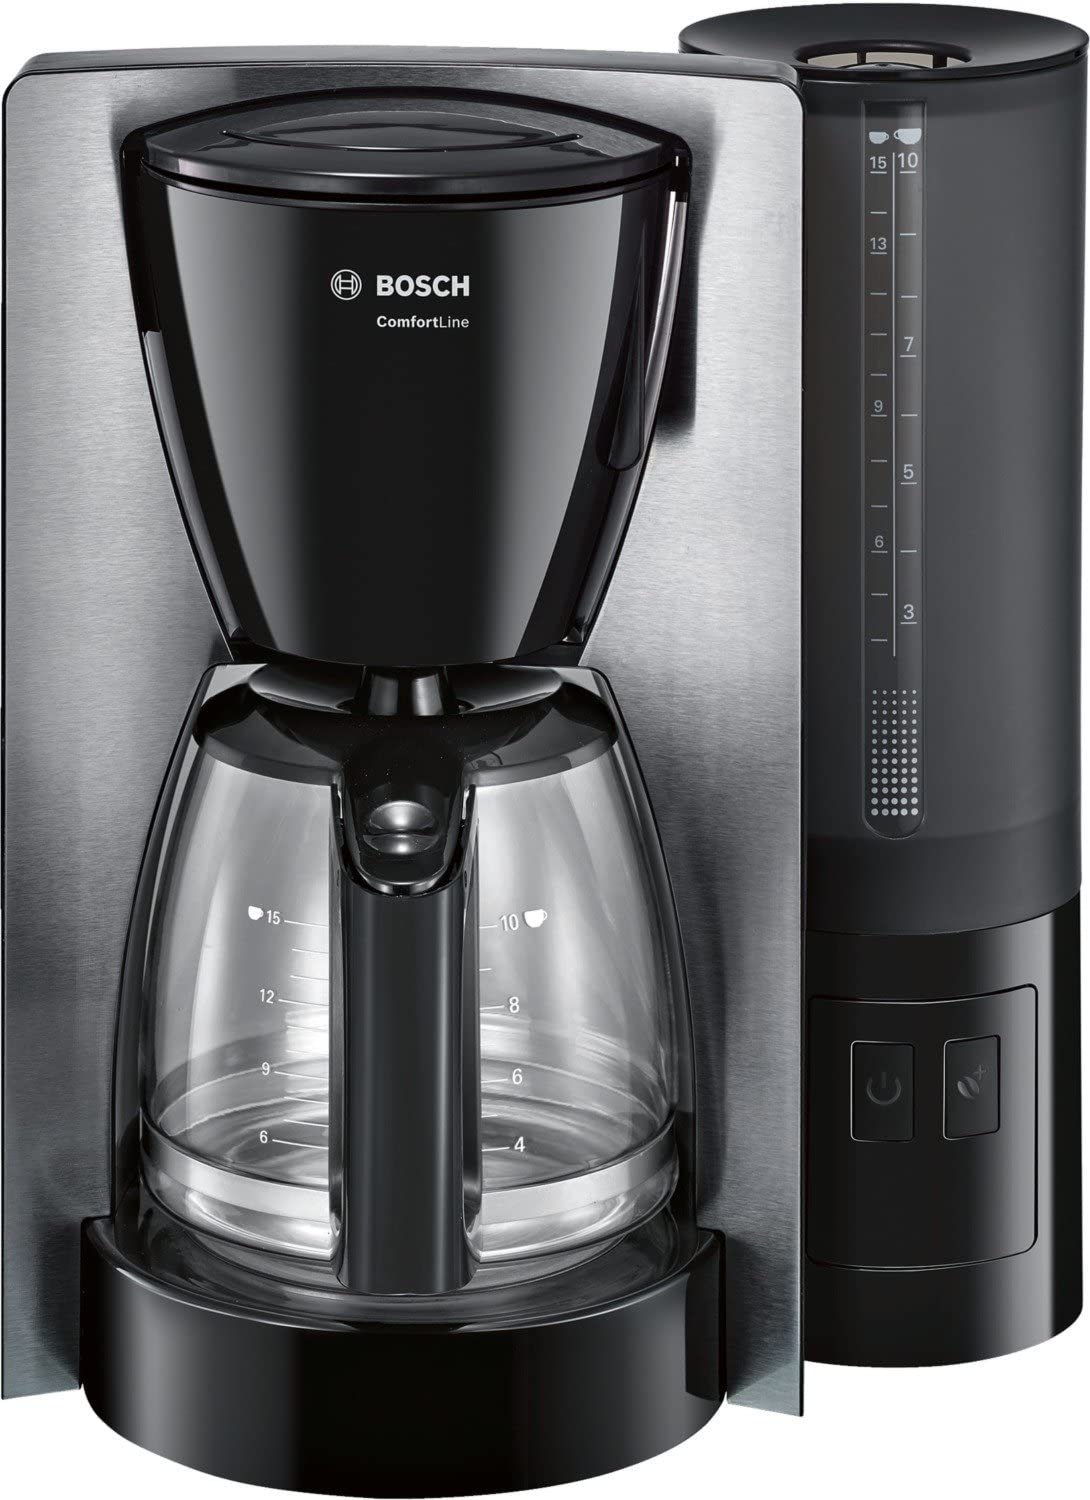 Bosch ComfortLine TKA6A643 Filter Coffee Machine, Aroma+, Aroma Protection Glass Jug 1.25 L, for 10-15 Cups, Removable Water Tank, Drip Stop, Swivel Filter Carrier, Cable Storage, 1200 W, Black